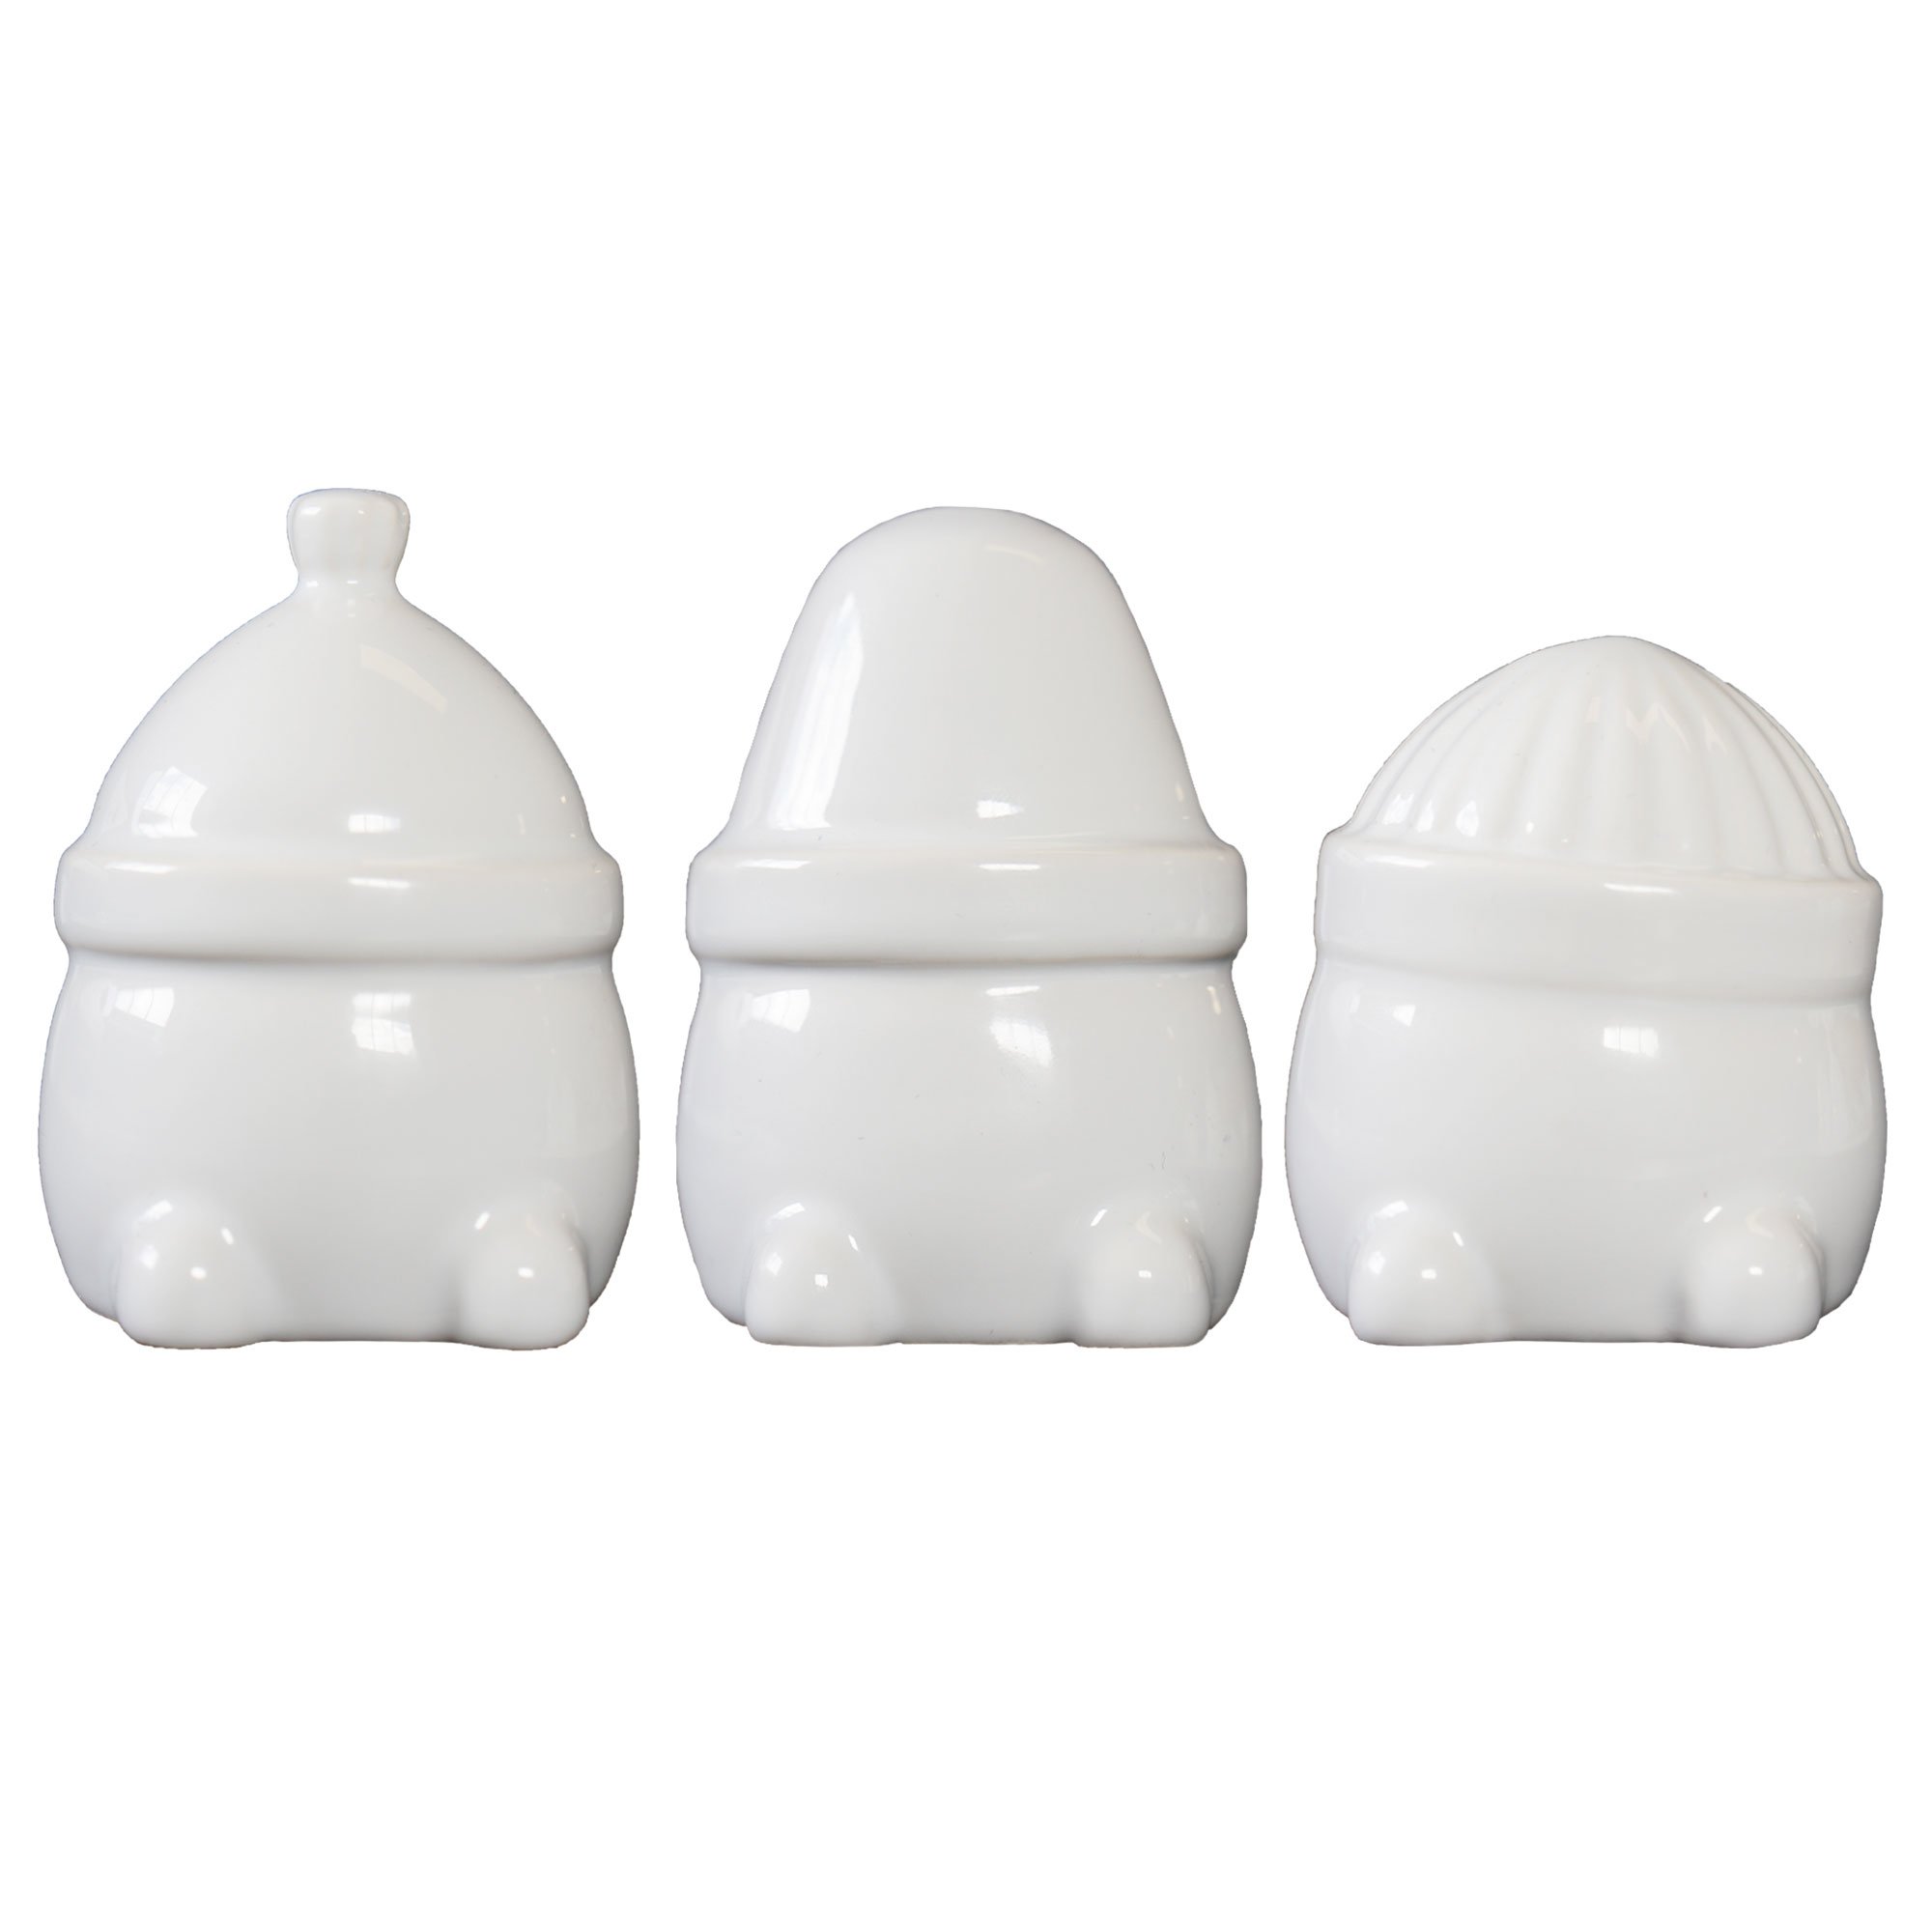 DBKD Hipster Triplets tomte, 3-pack, shiny white